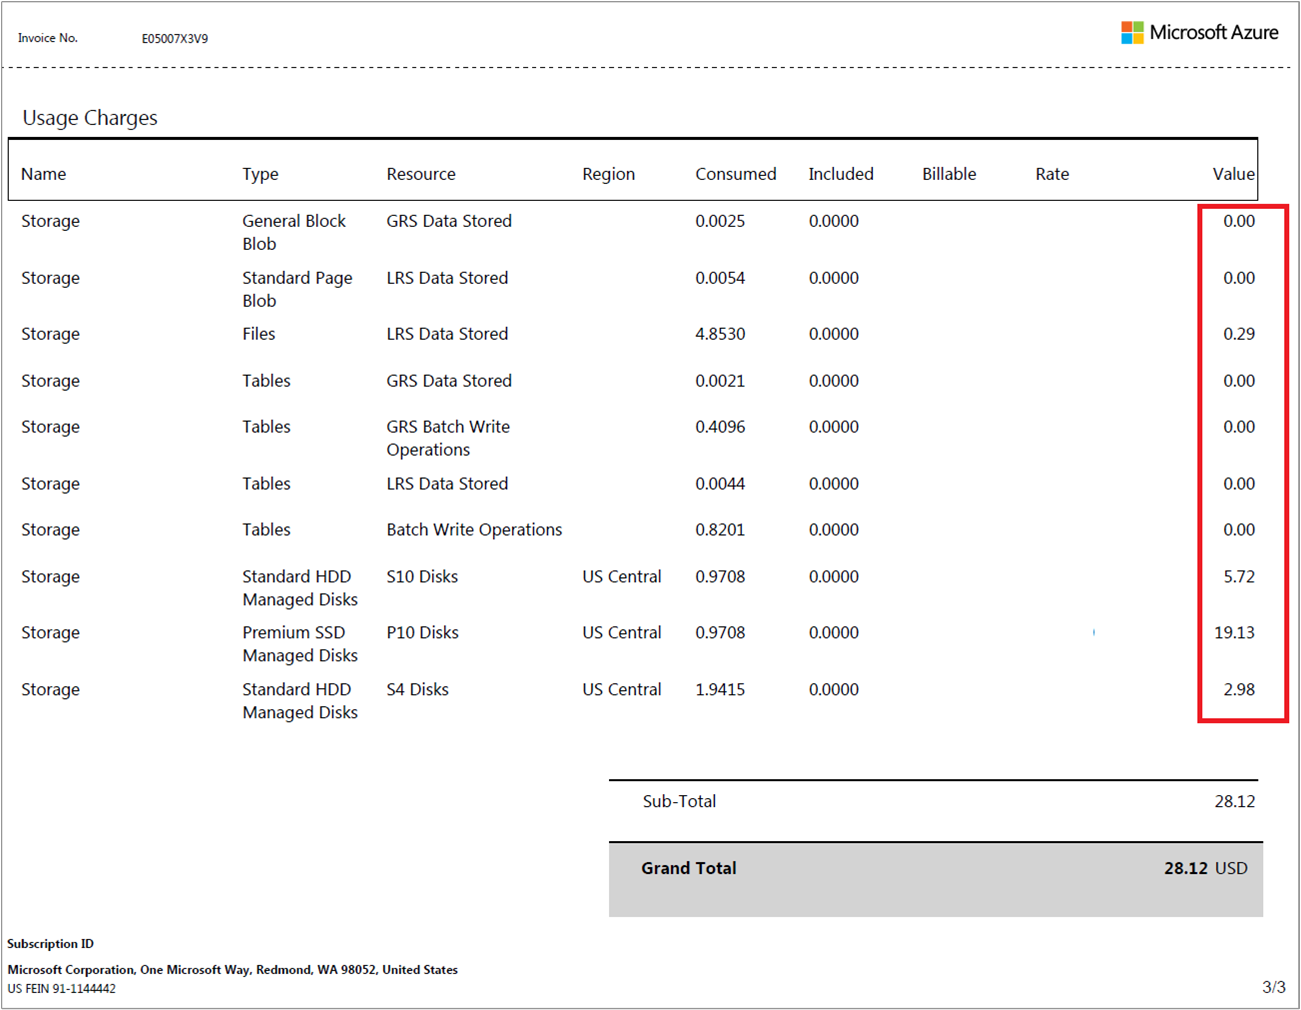 Screenshot showing invoice usage charges.